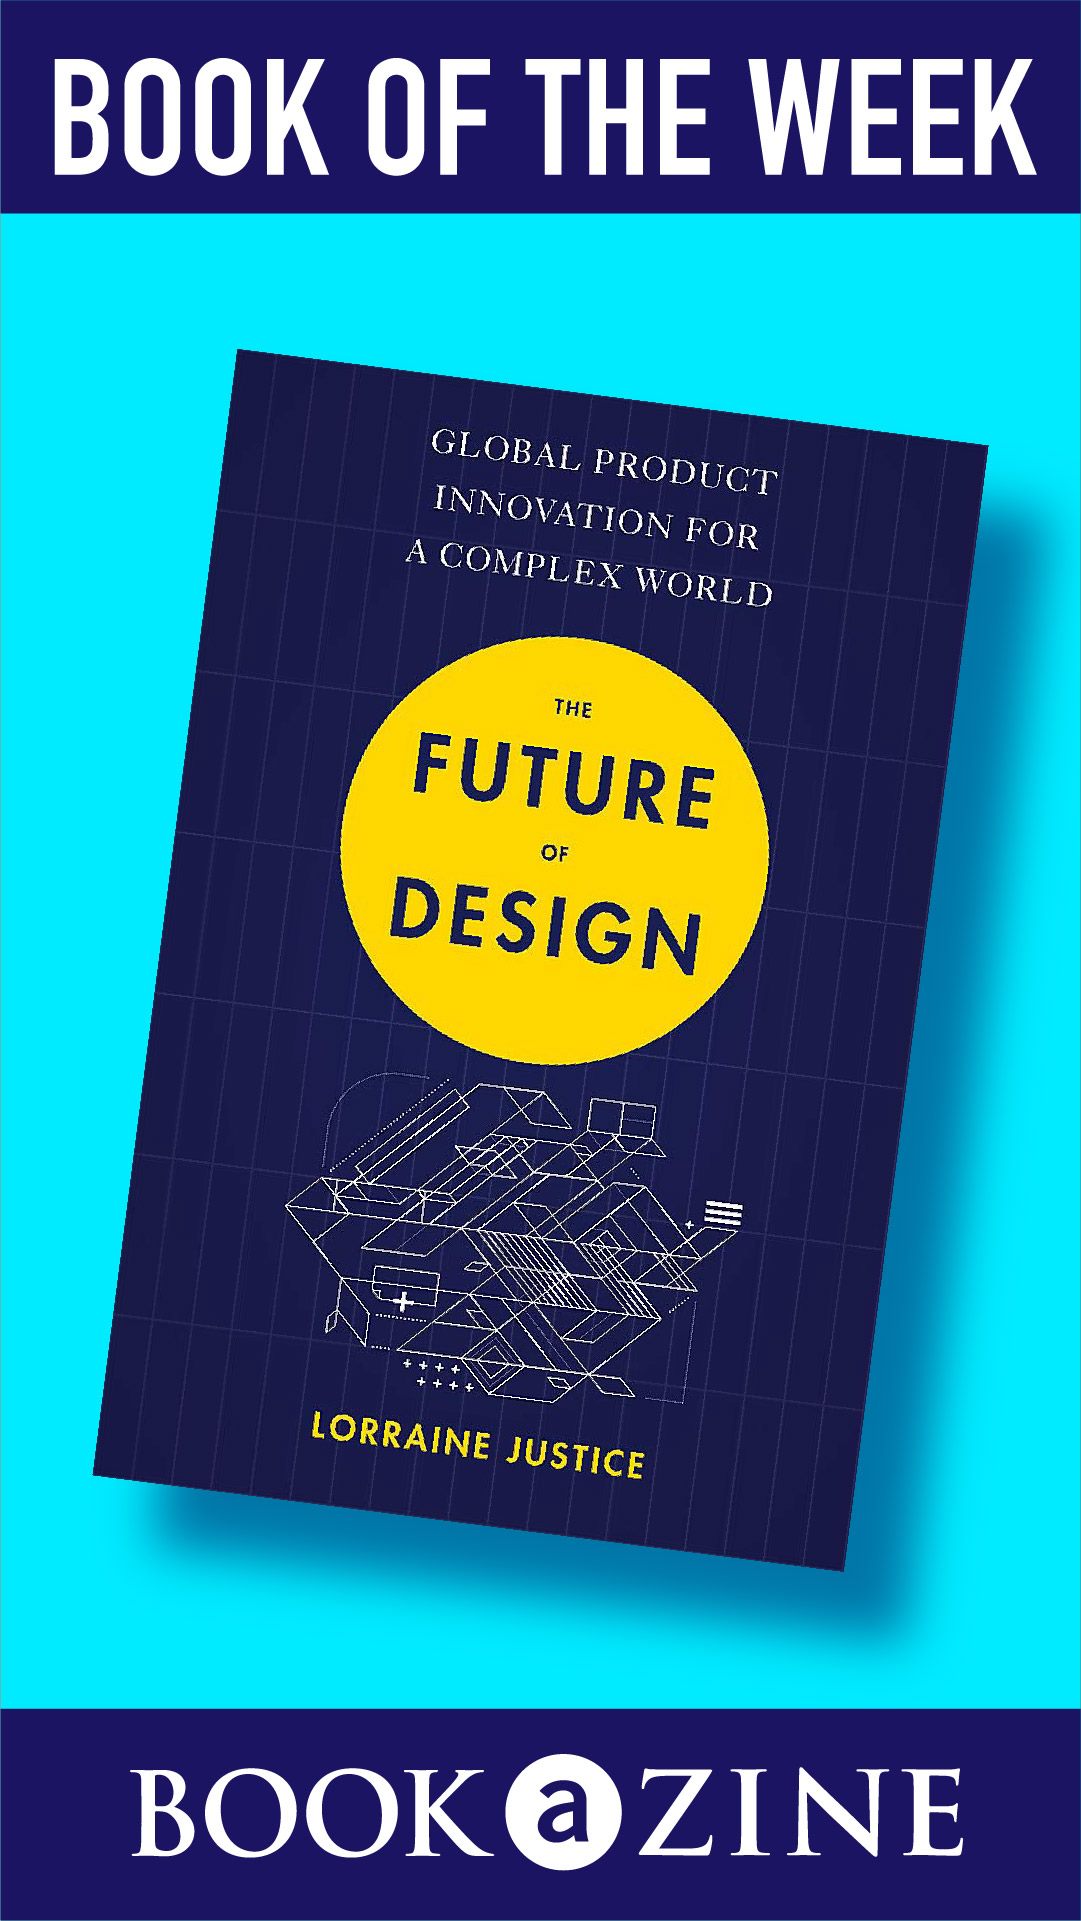 BOOK OF THE WEEK - The Future of Design by Lorraine Justice